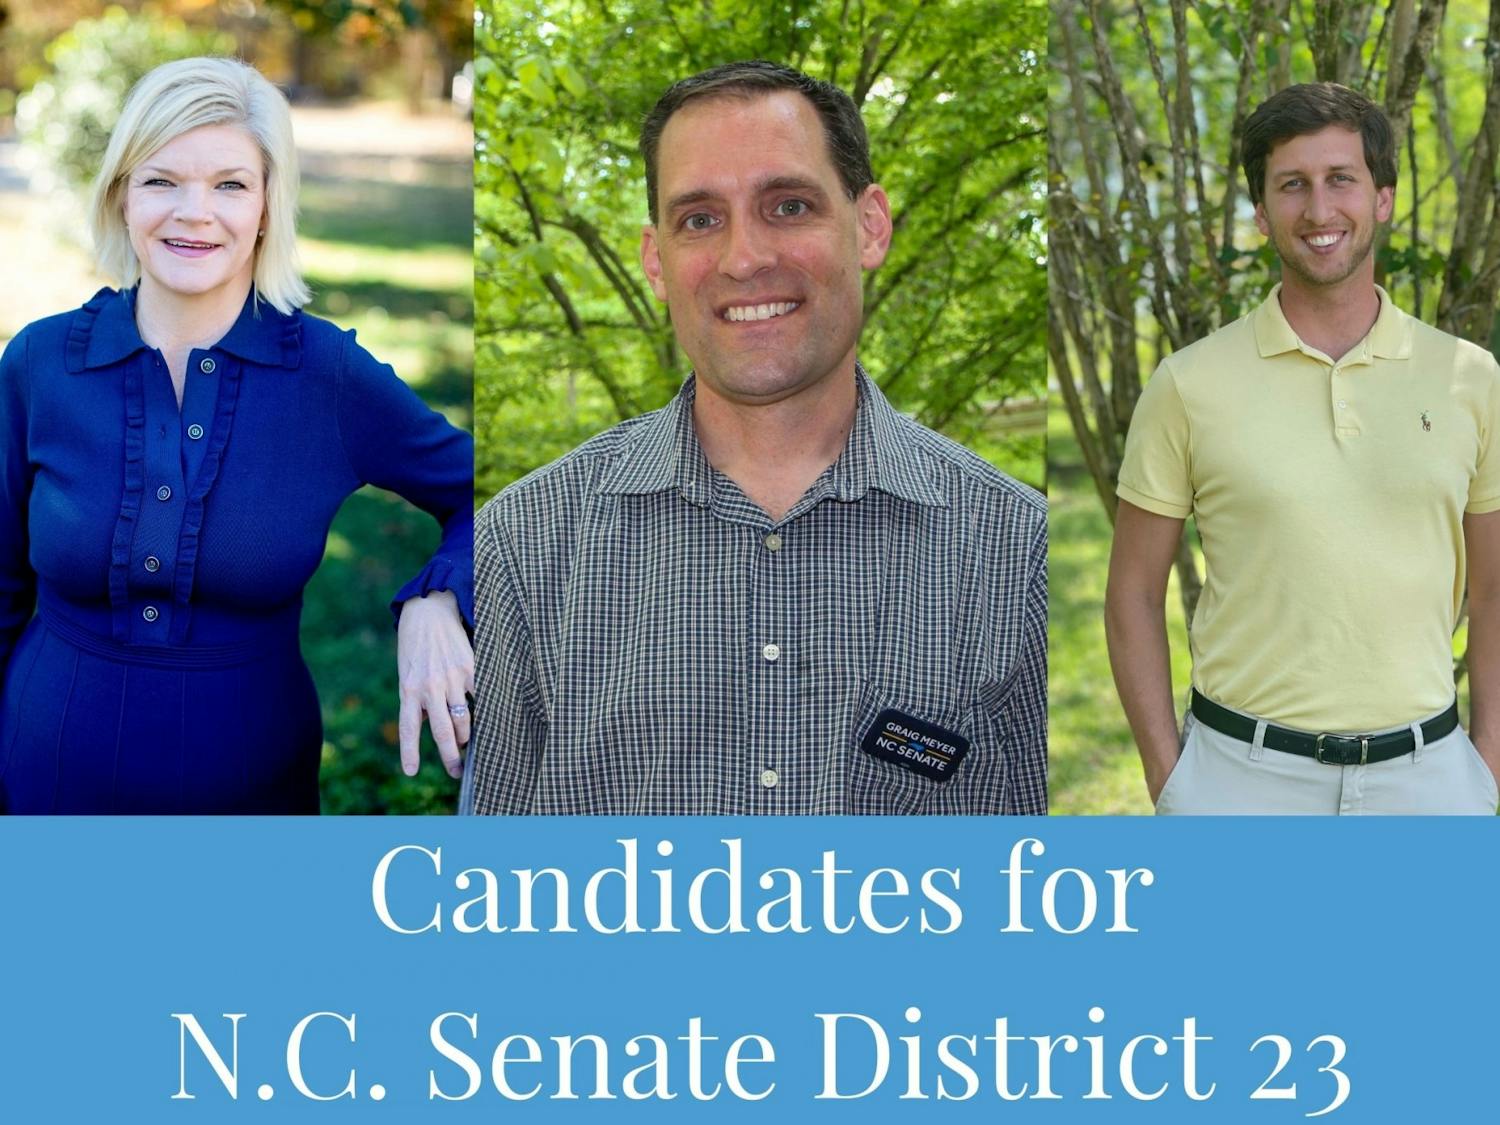 The four candidates for N.C. Senate District 23 include Democrats Jamie DeMent Holcomb and N.C. Rep. Graig Meyer, D-Caswell, Orange, and Republican Landon Woods. Bill Cooke, another Republican nominee, did not respond to The Daily Tar Heel's request for a photo. Photos courtesy of Dement Holcomb and Woods and by DTH/Saurya Acharya.